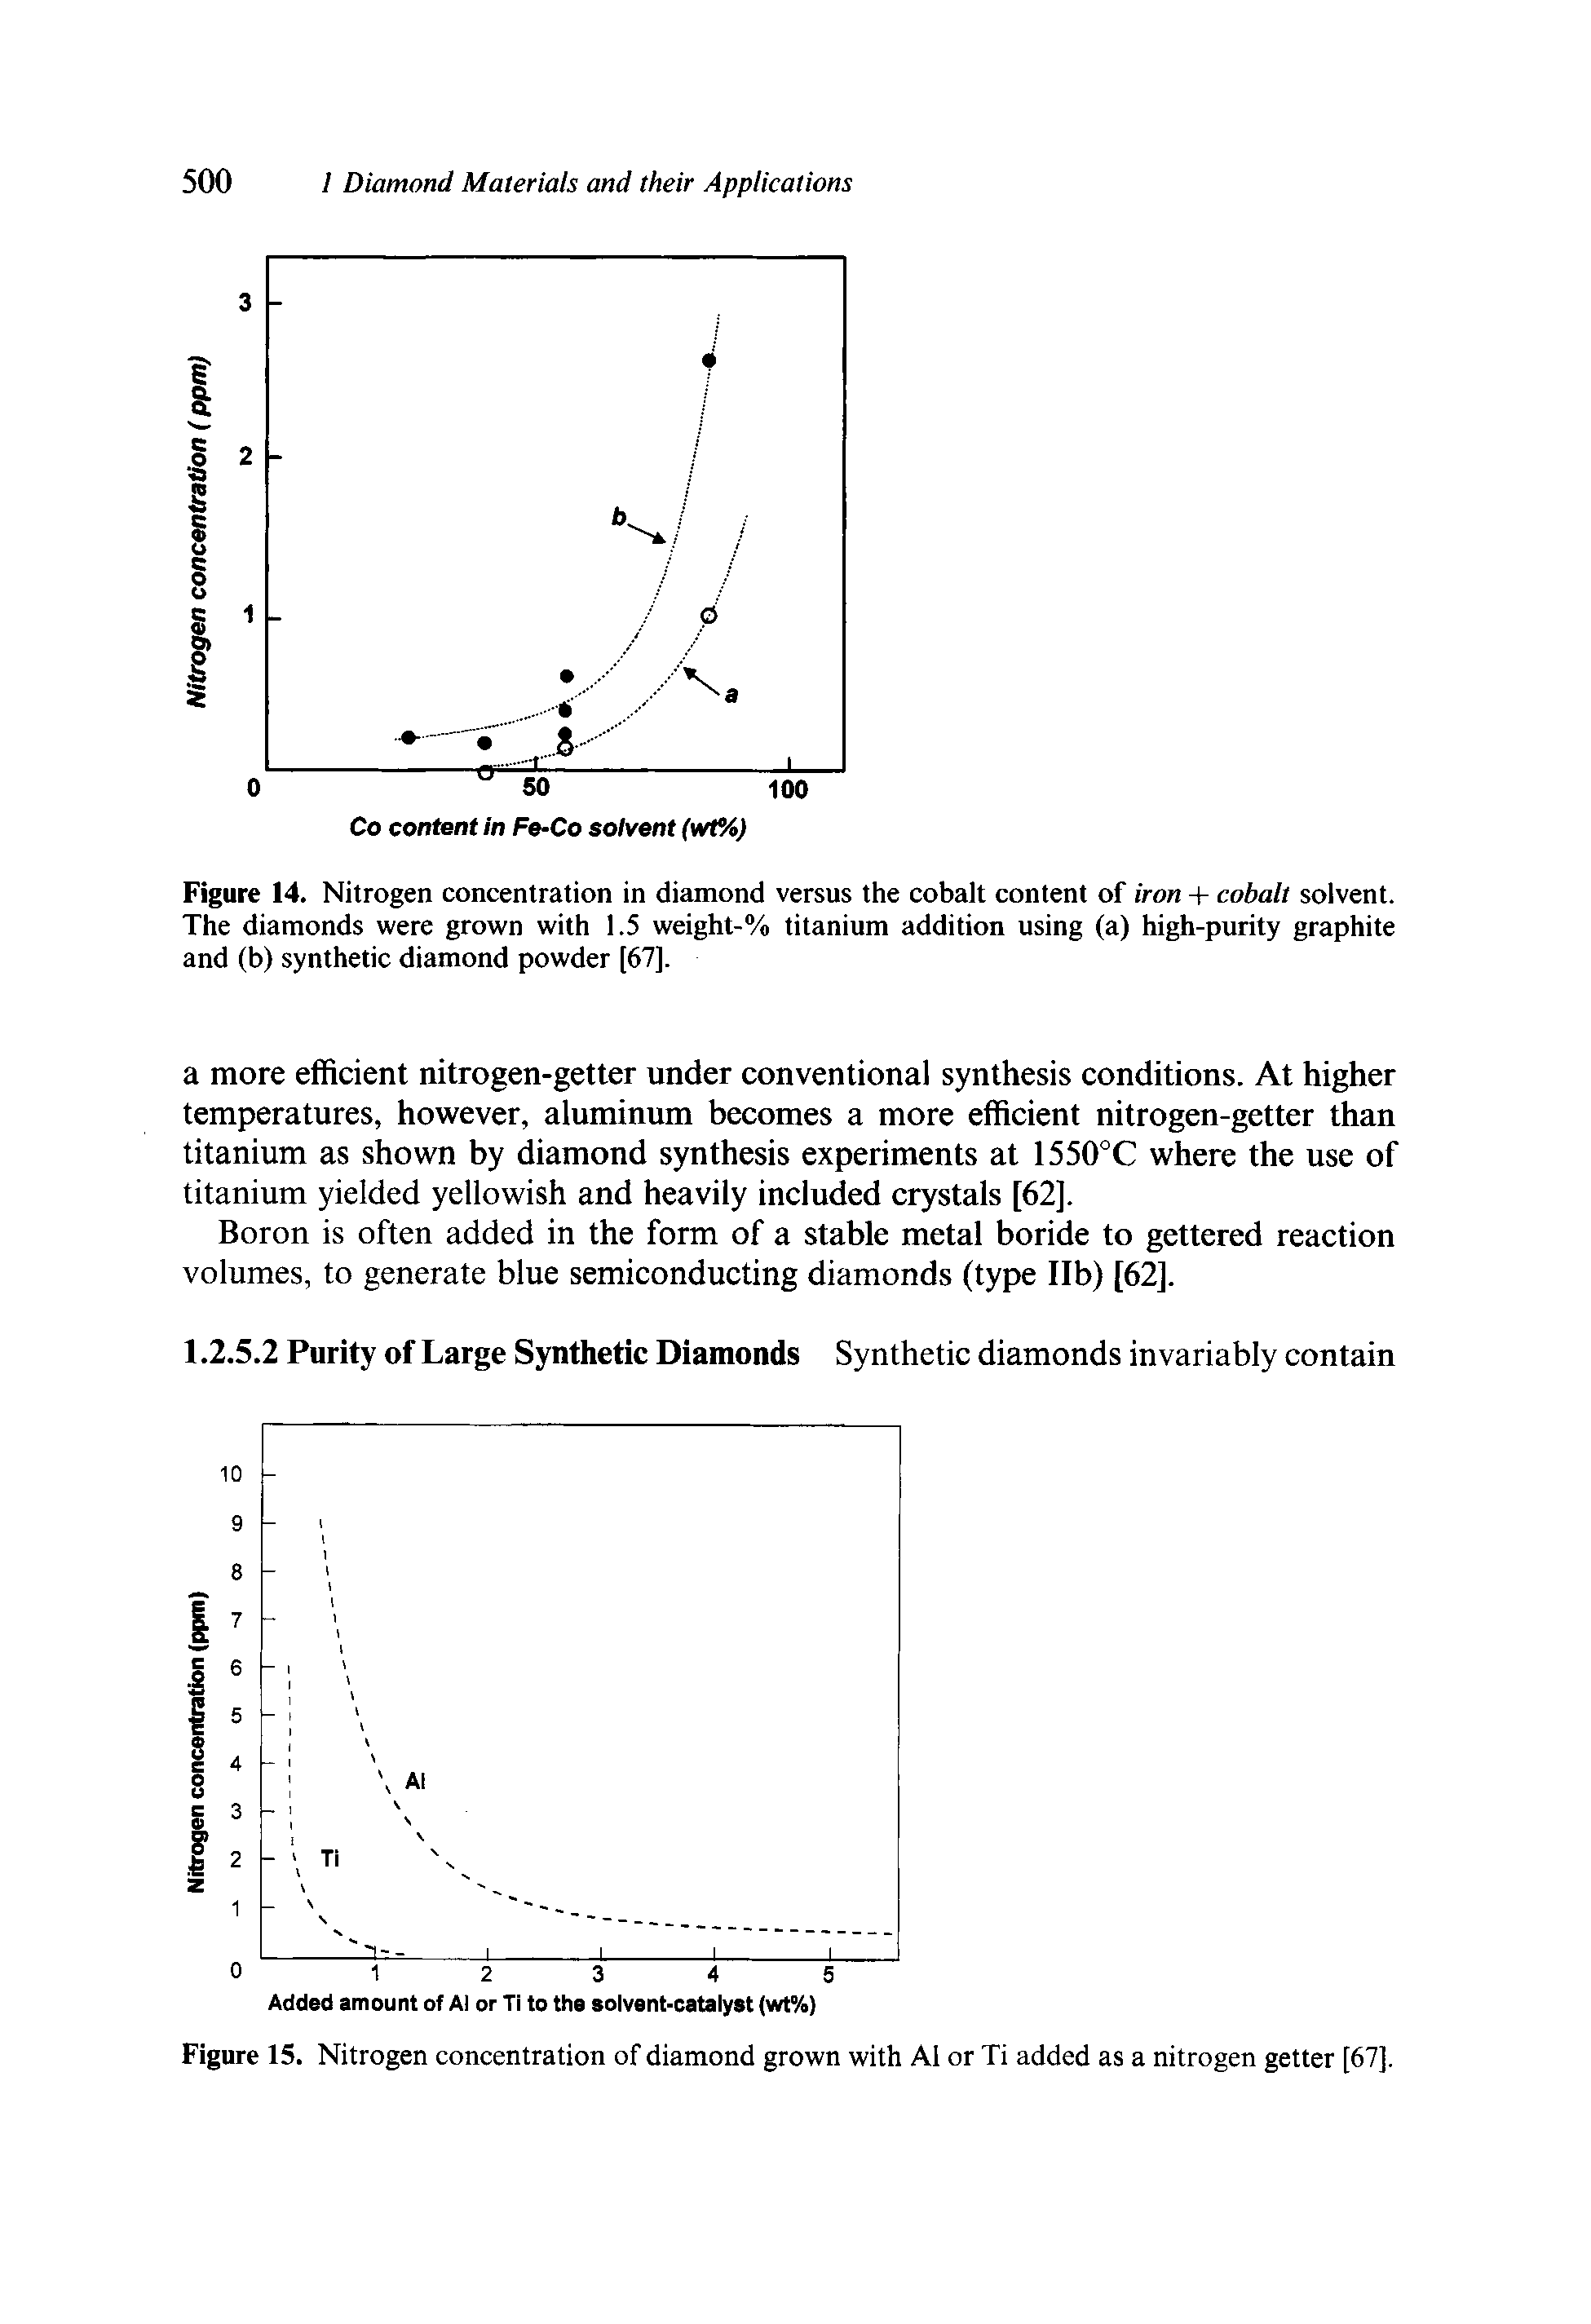 Figure 14. Nitrogen concentration in diamond versus the cobalt content of iron + cobalt solvent. The diamonds were grown with 1.5 weight-% titanium addition using (a) high-purity graphite and (b) synthetic diamond powder [67].